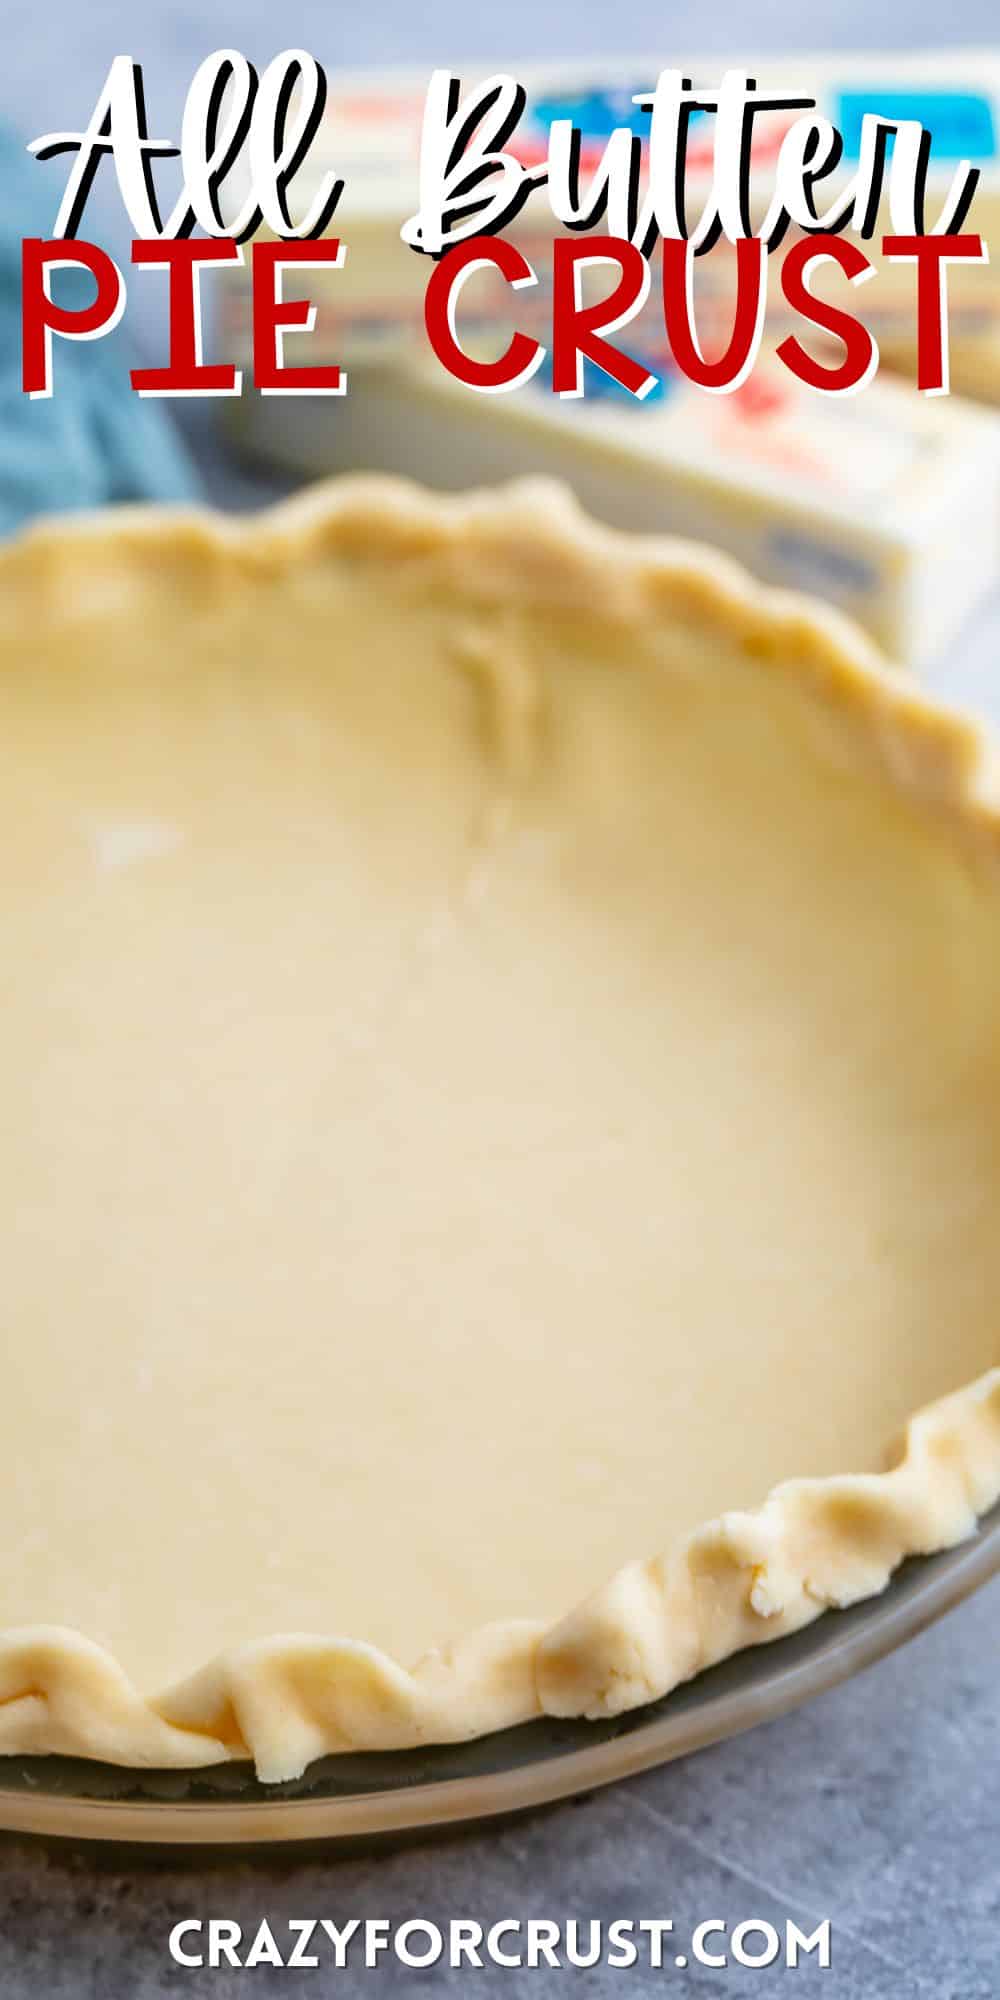 butter pie crust in a clear pan with words on the image.